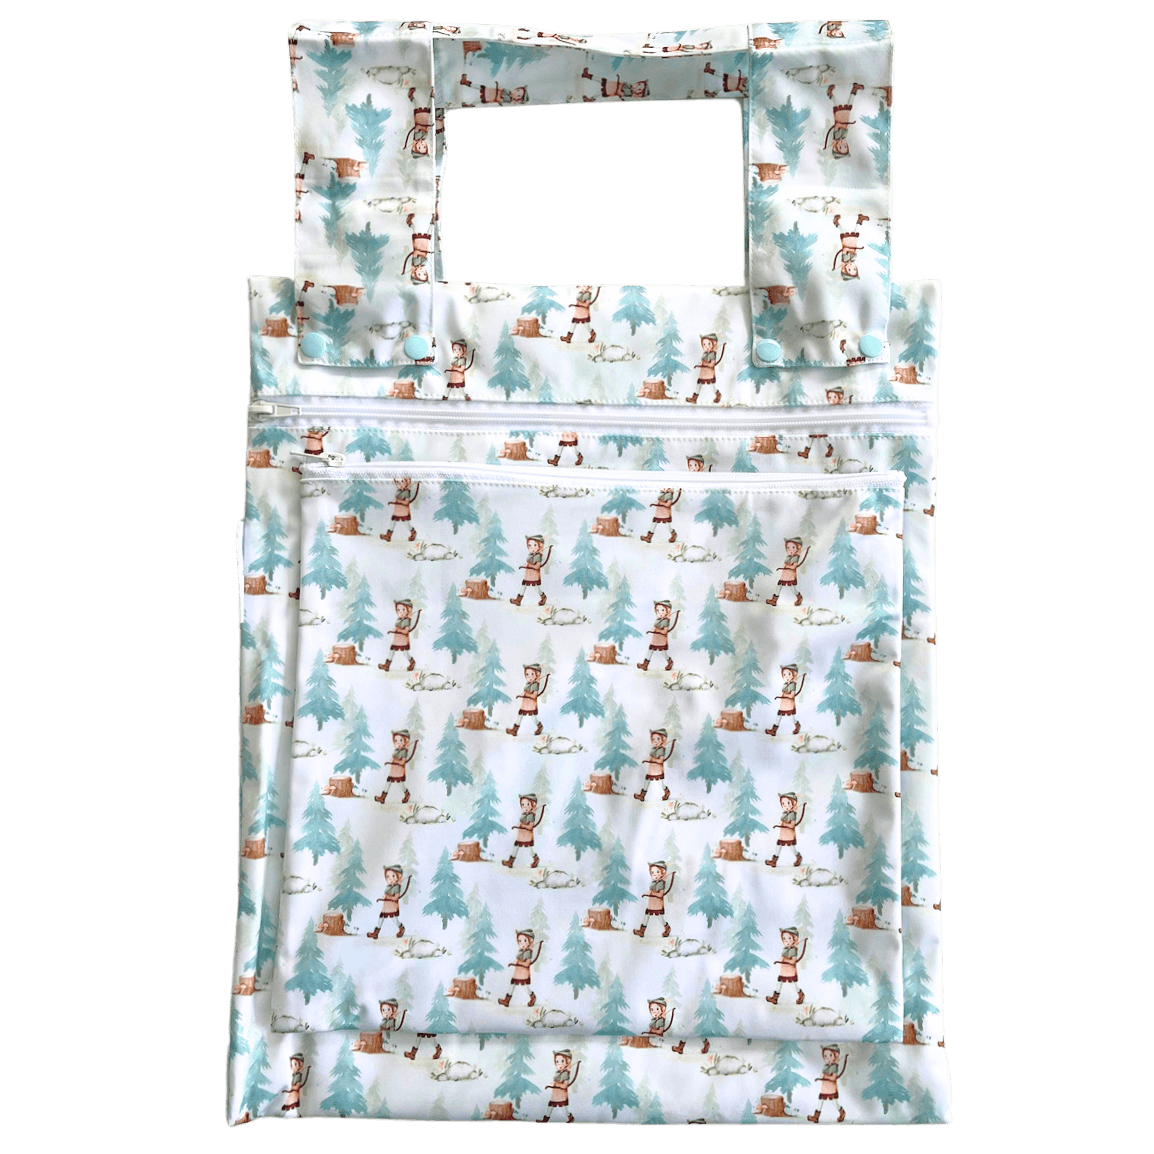 Wet Bag - Double - Story Book - Baby Bare Cloth Nappies